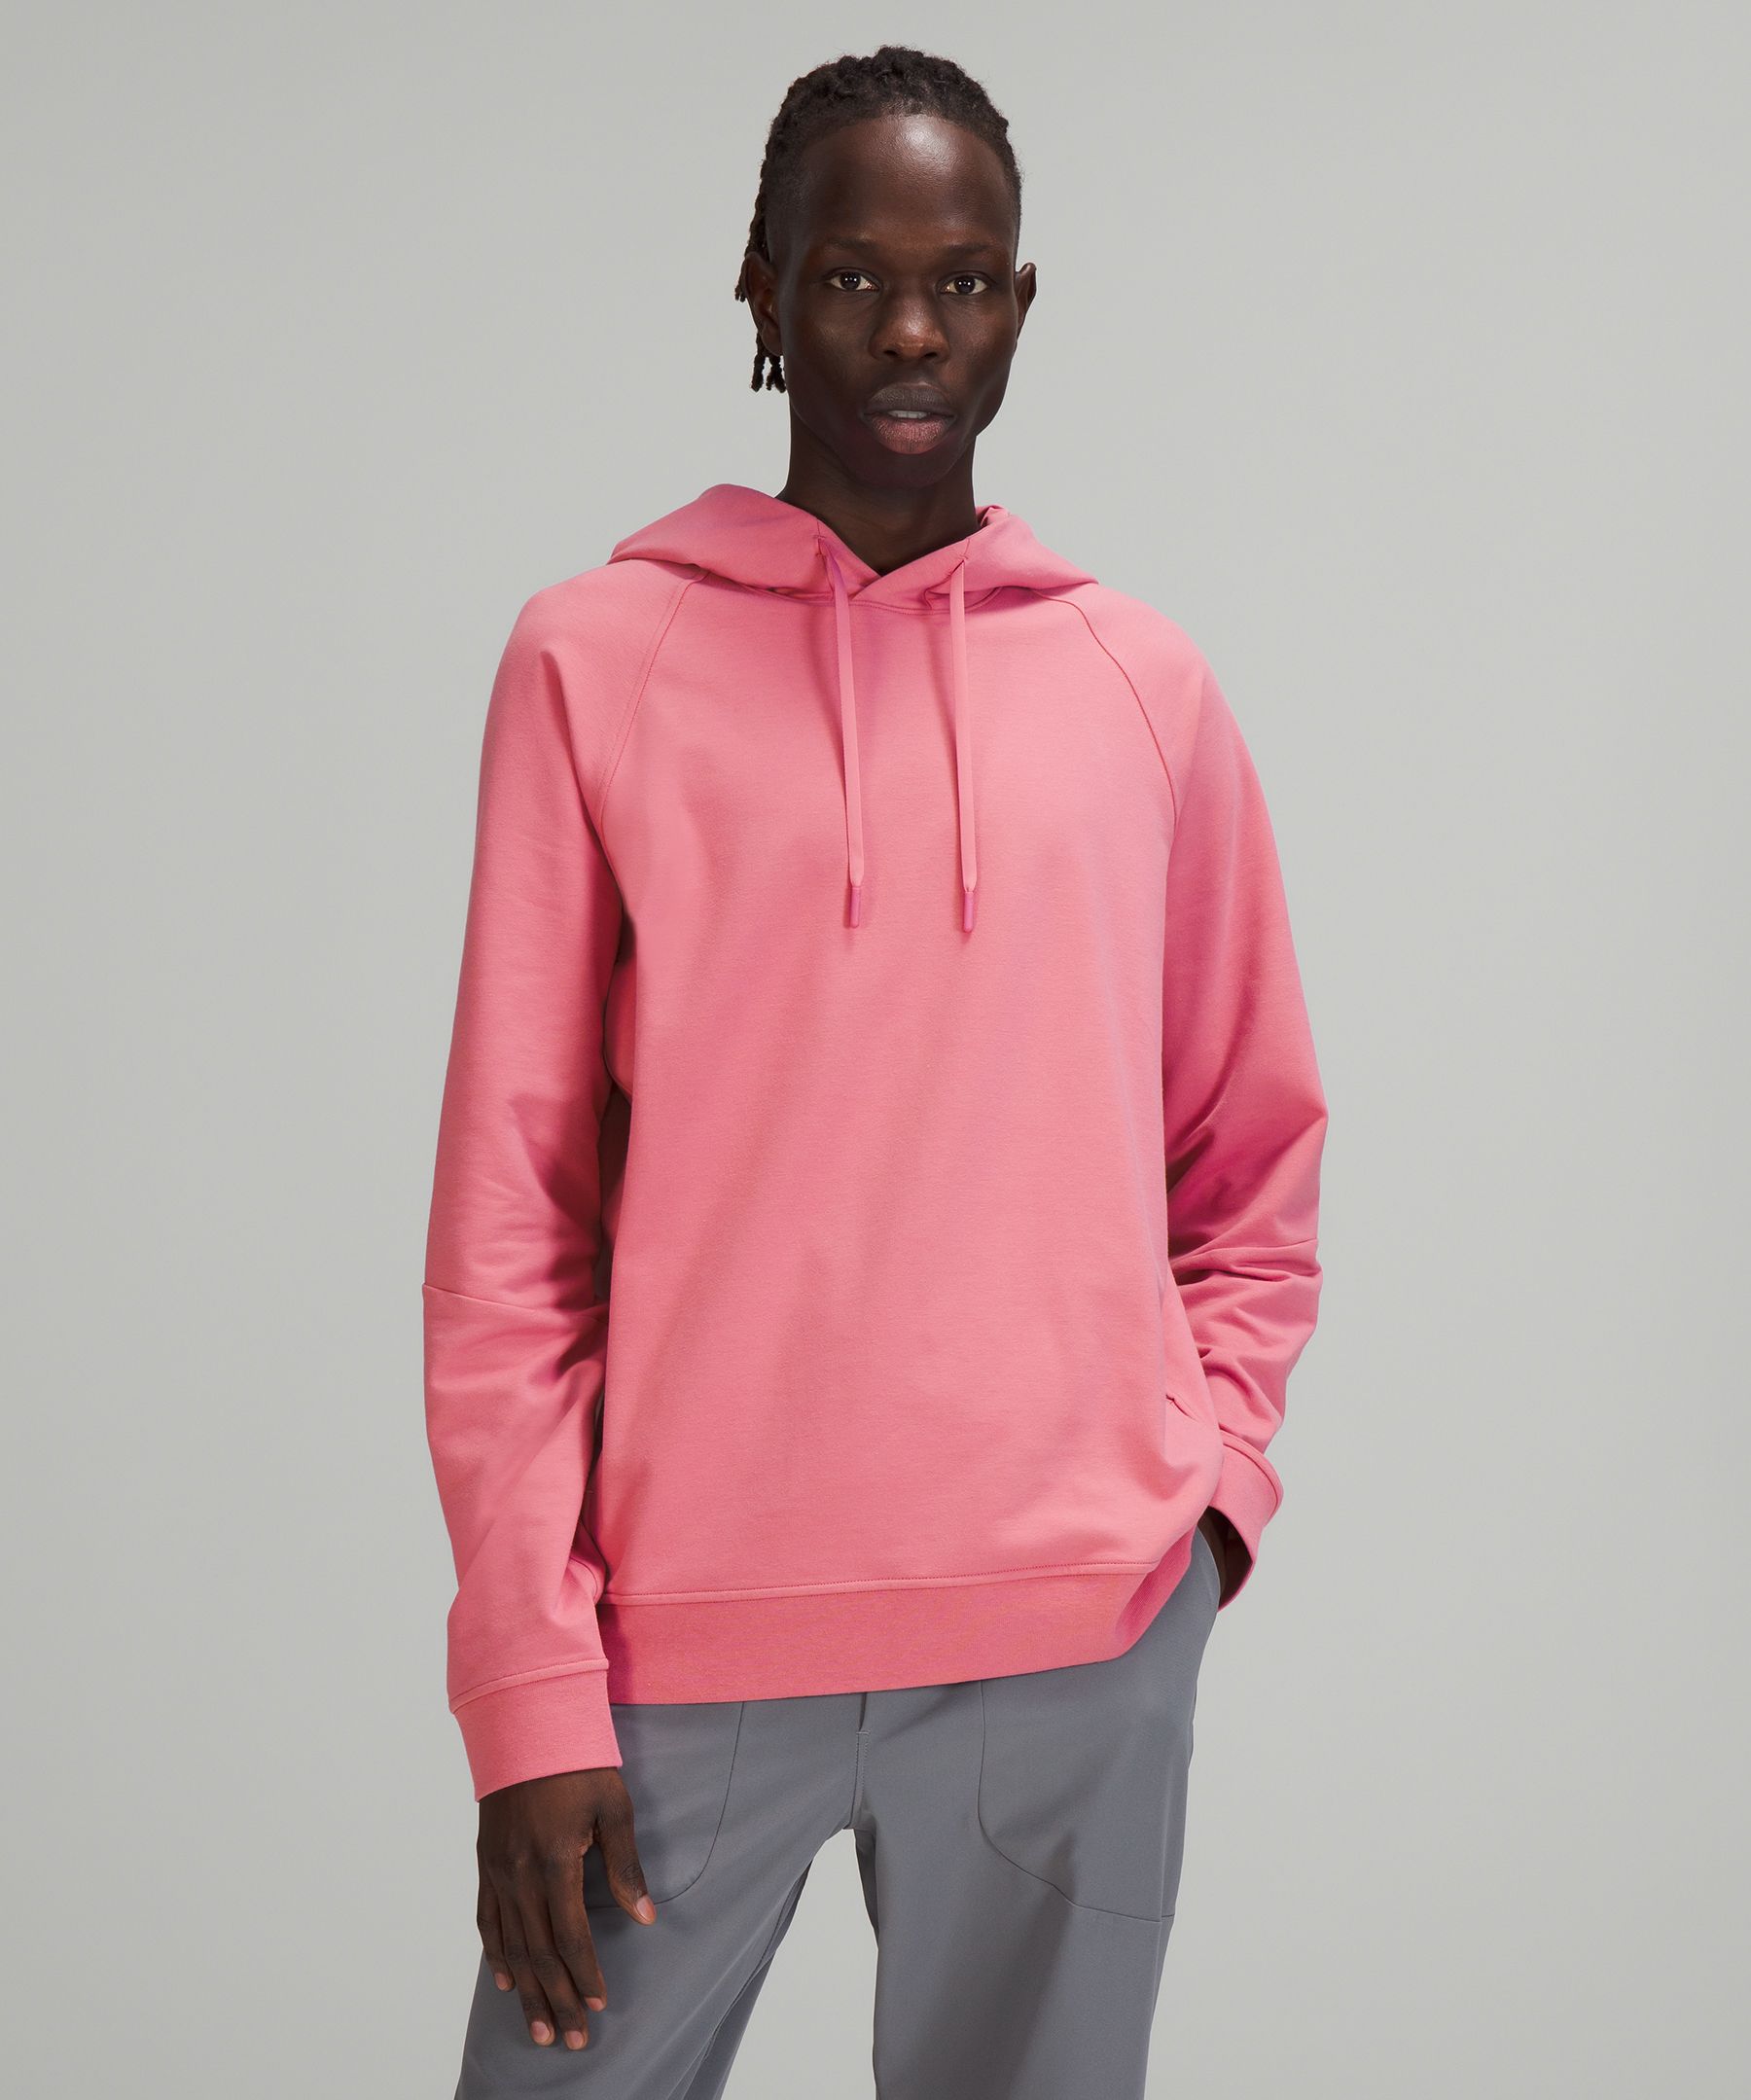 Lululemon City Sweat Pullover Hoodie In Pink Blossom